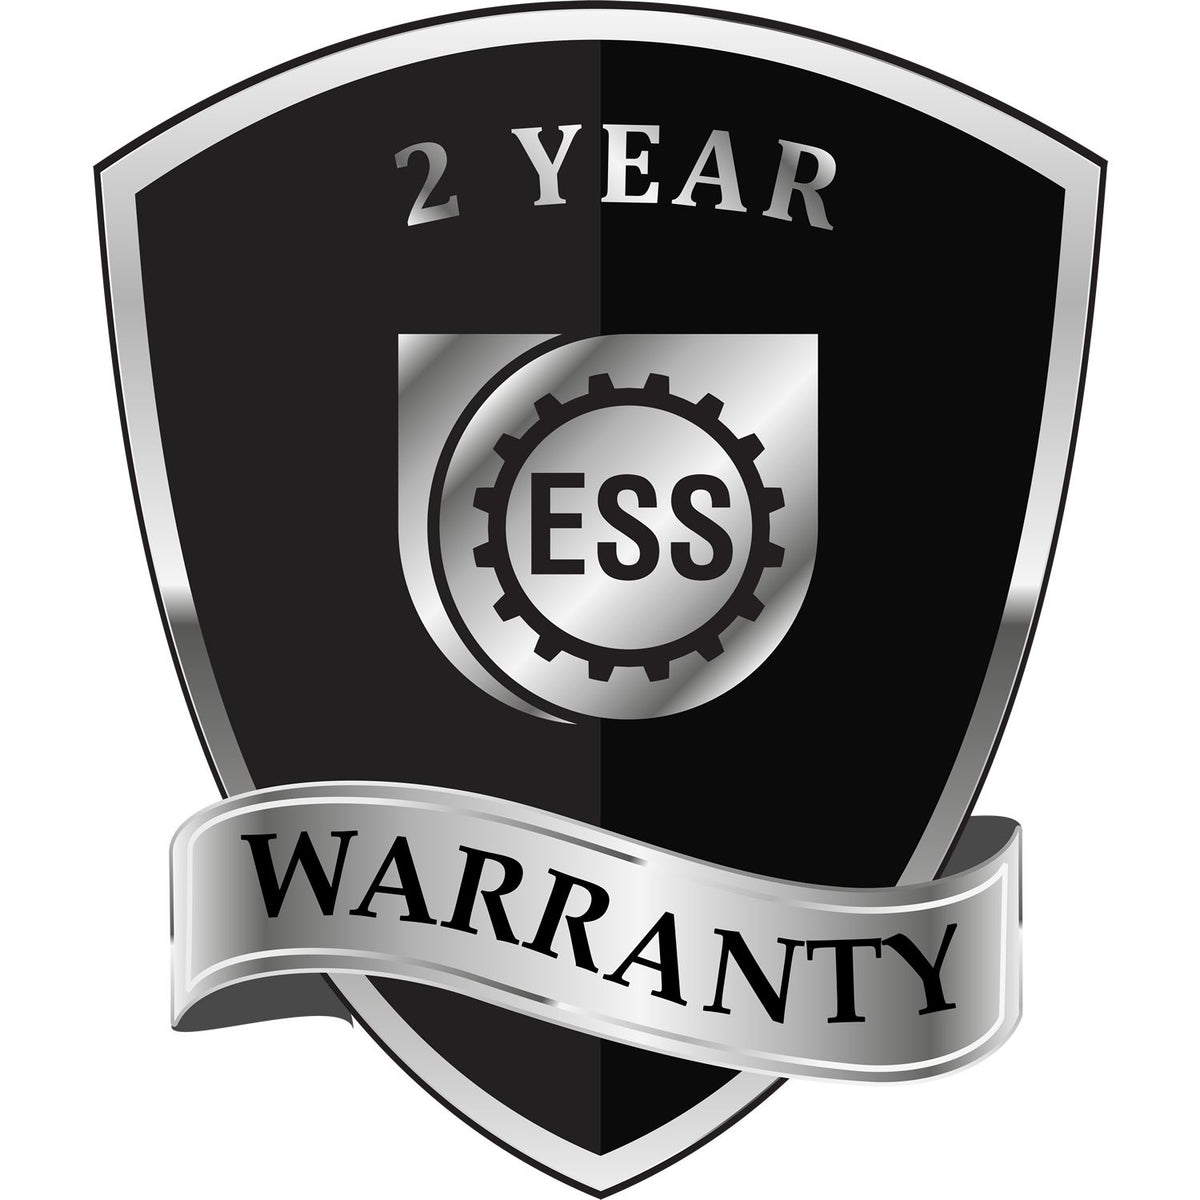 A black and silver badge or emblem showing warranty information for the Heavy Duty Cast Iron Alaska Geologist Seal Embosser